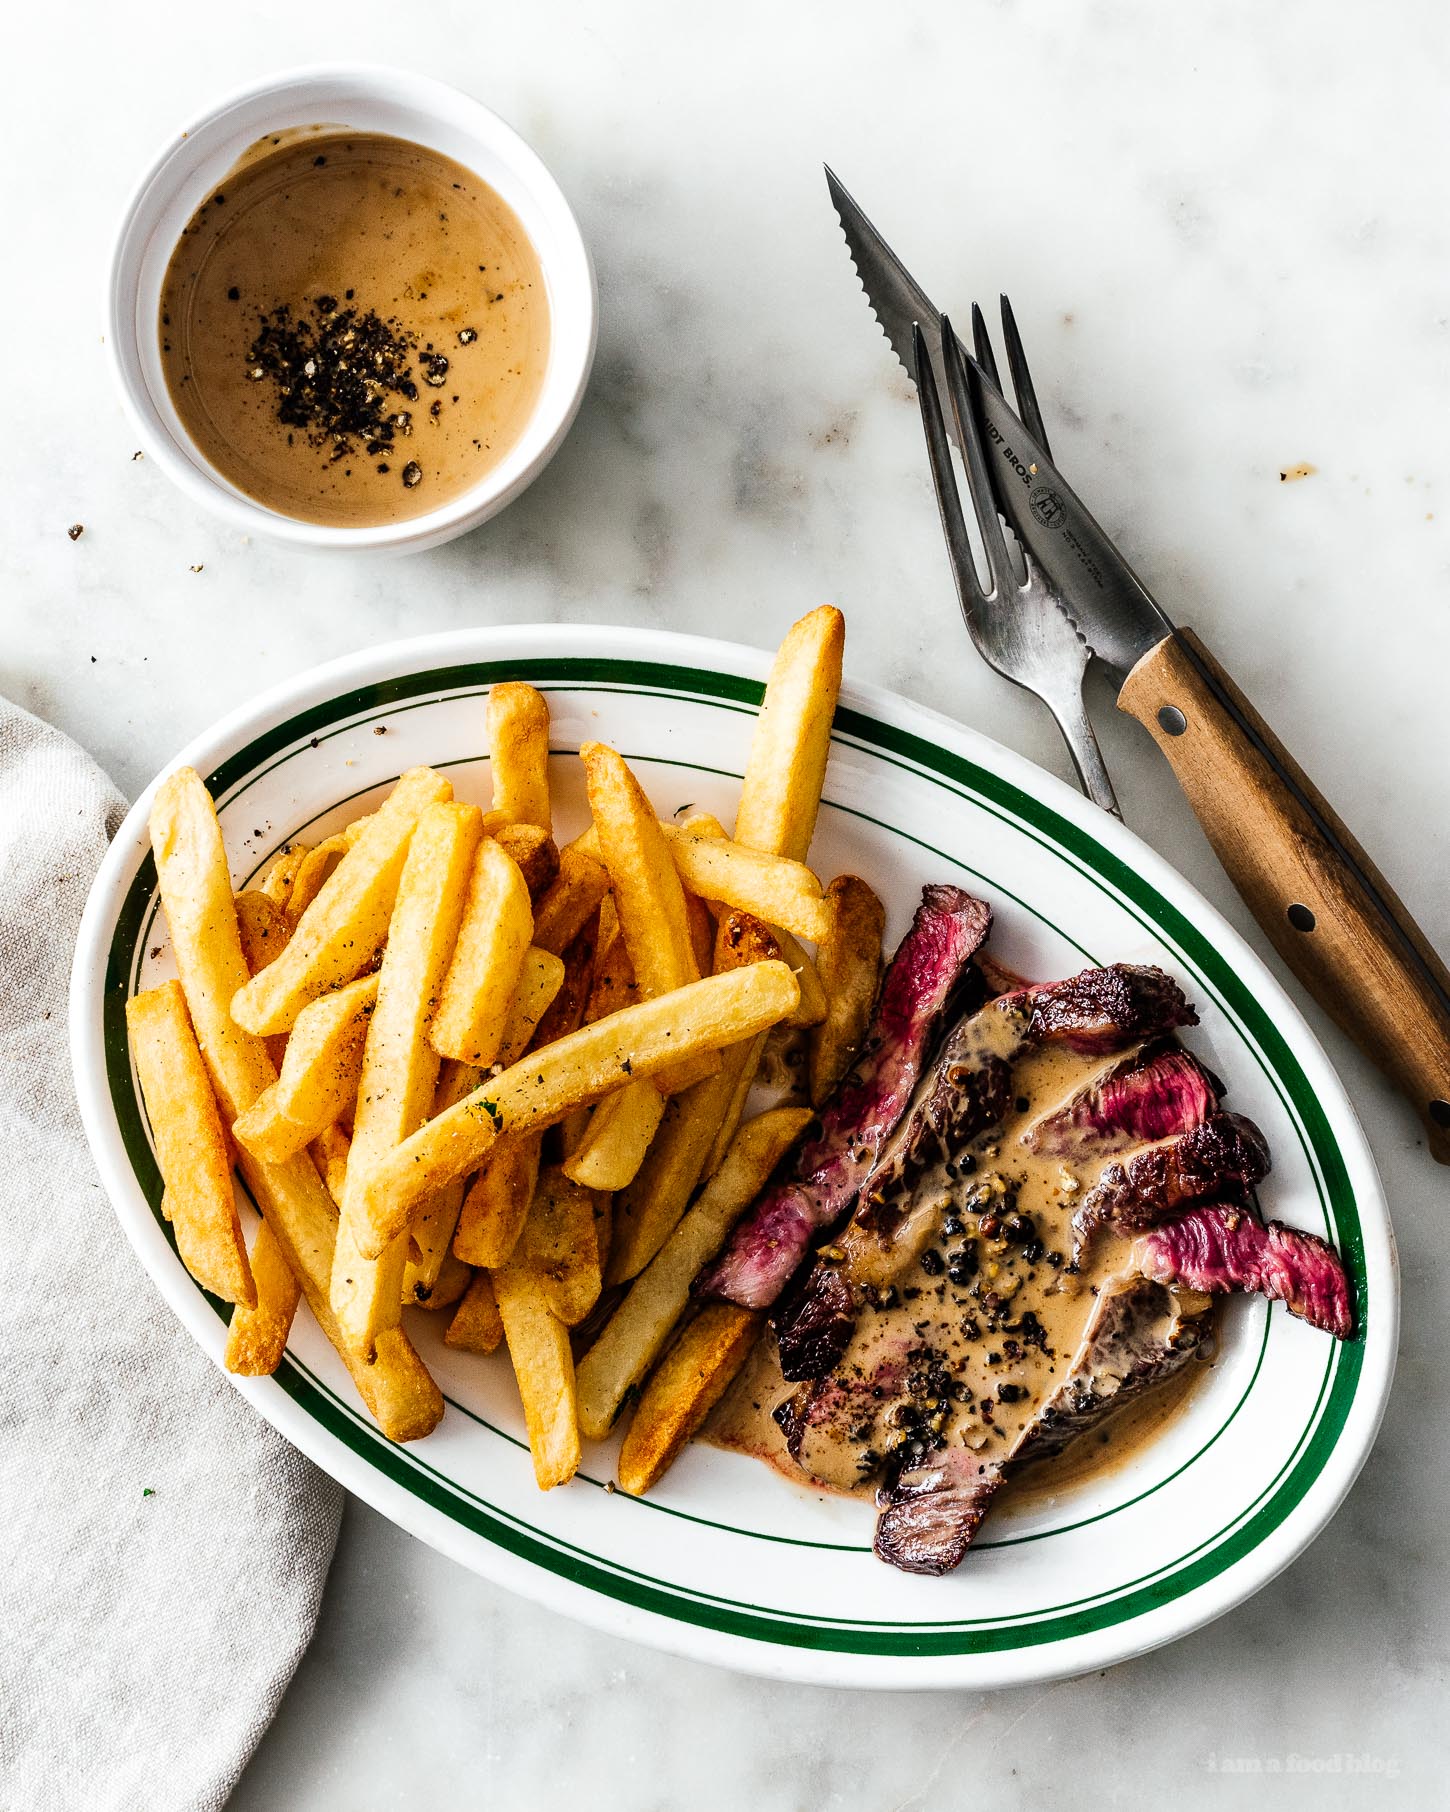 The 5 Best Steak Sauce Recipes To Serve With Your Weeknight Steak Frites Right Now I Am A Food Blog,Coneflower